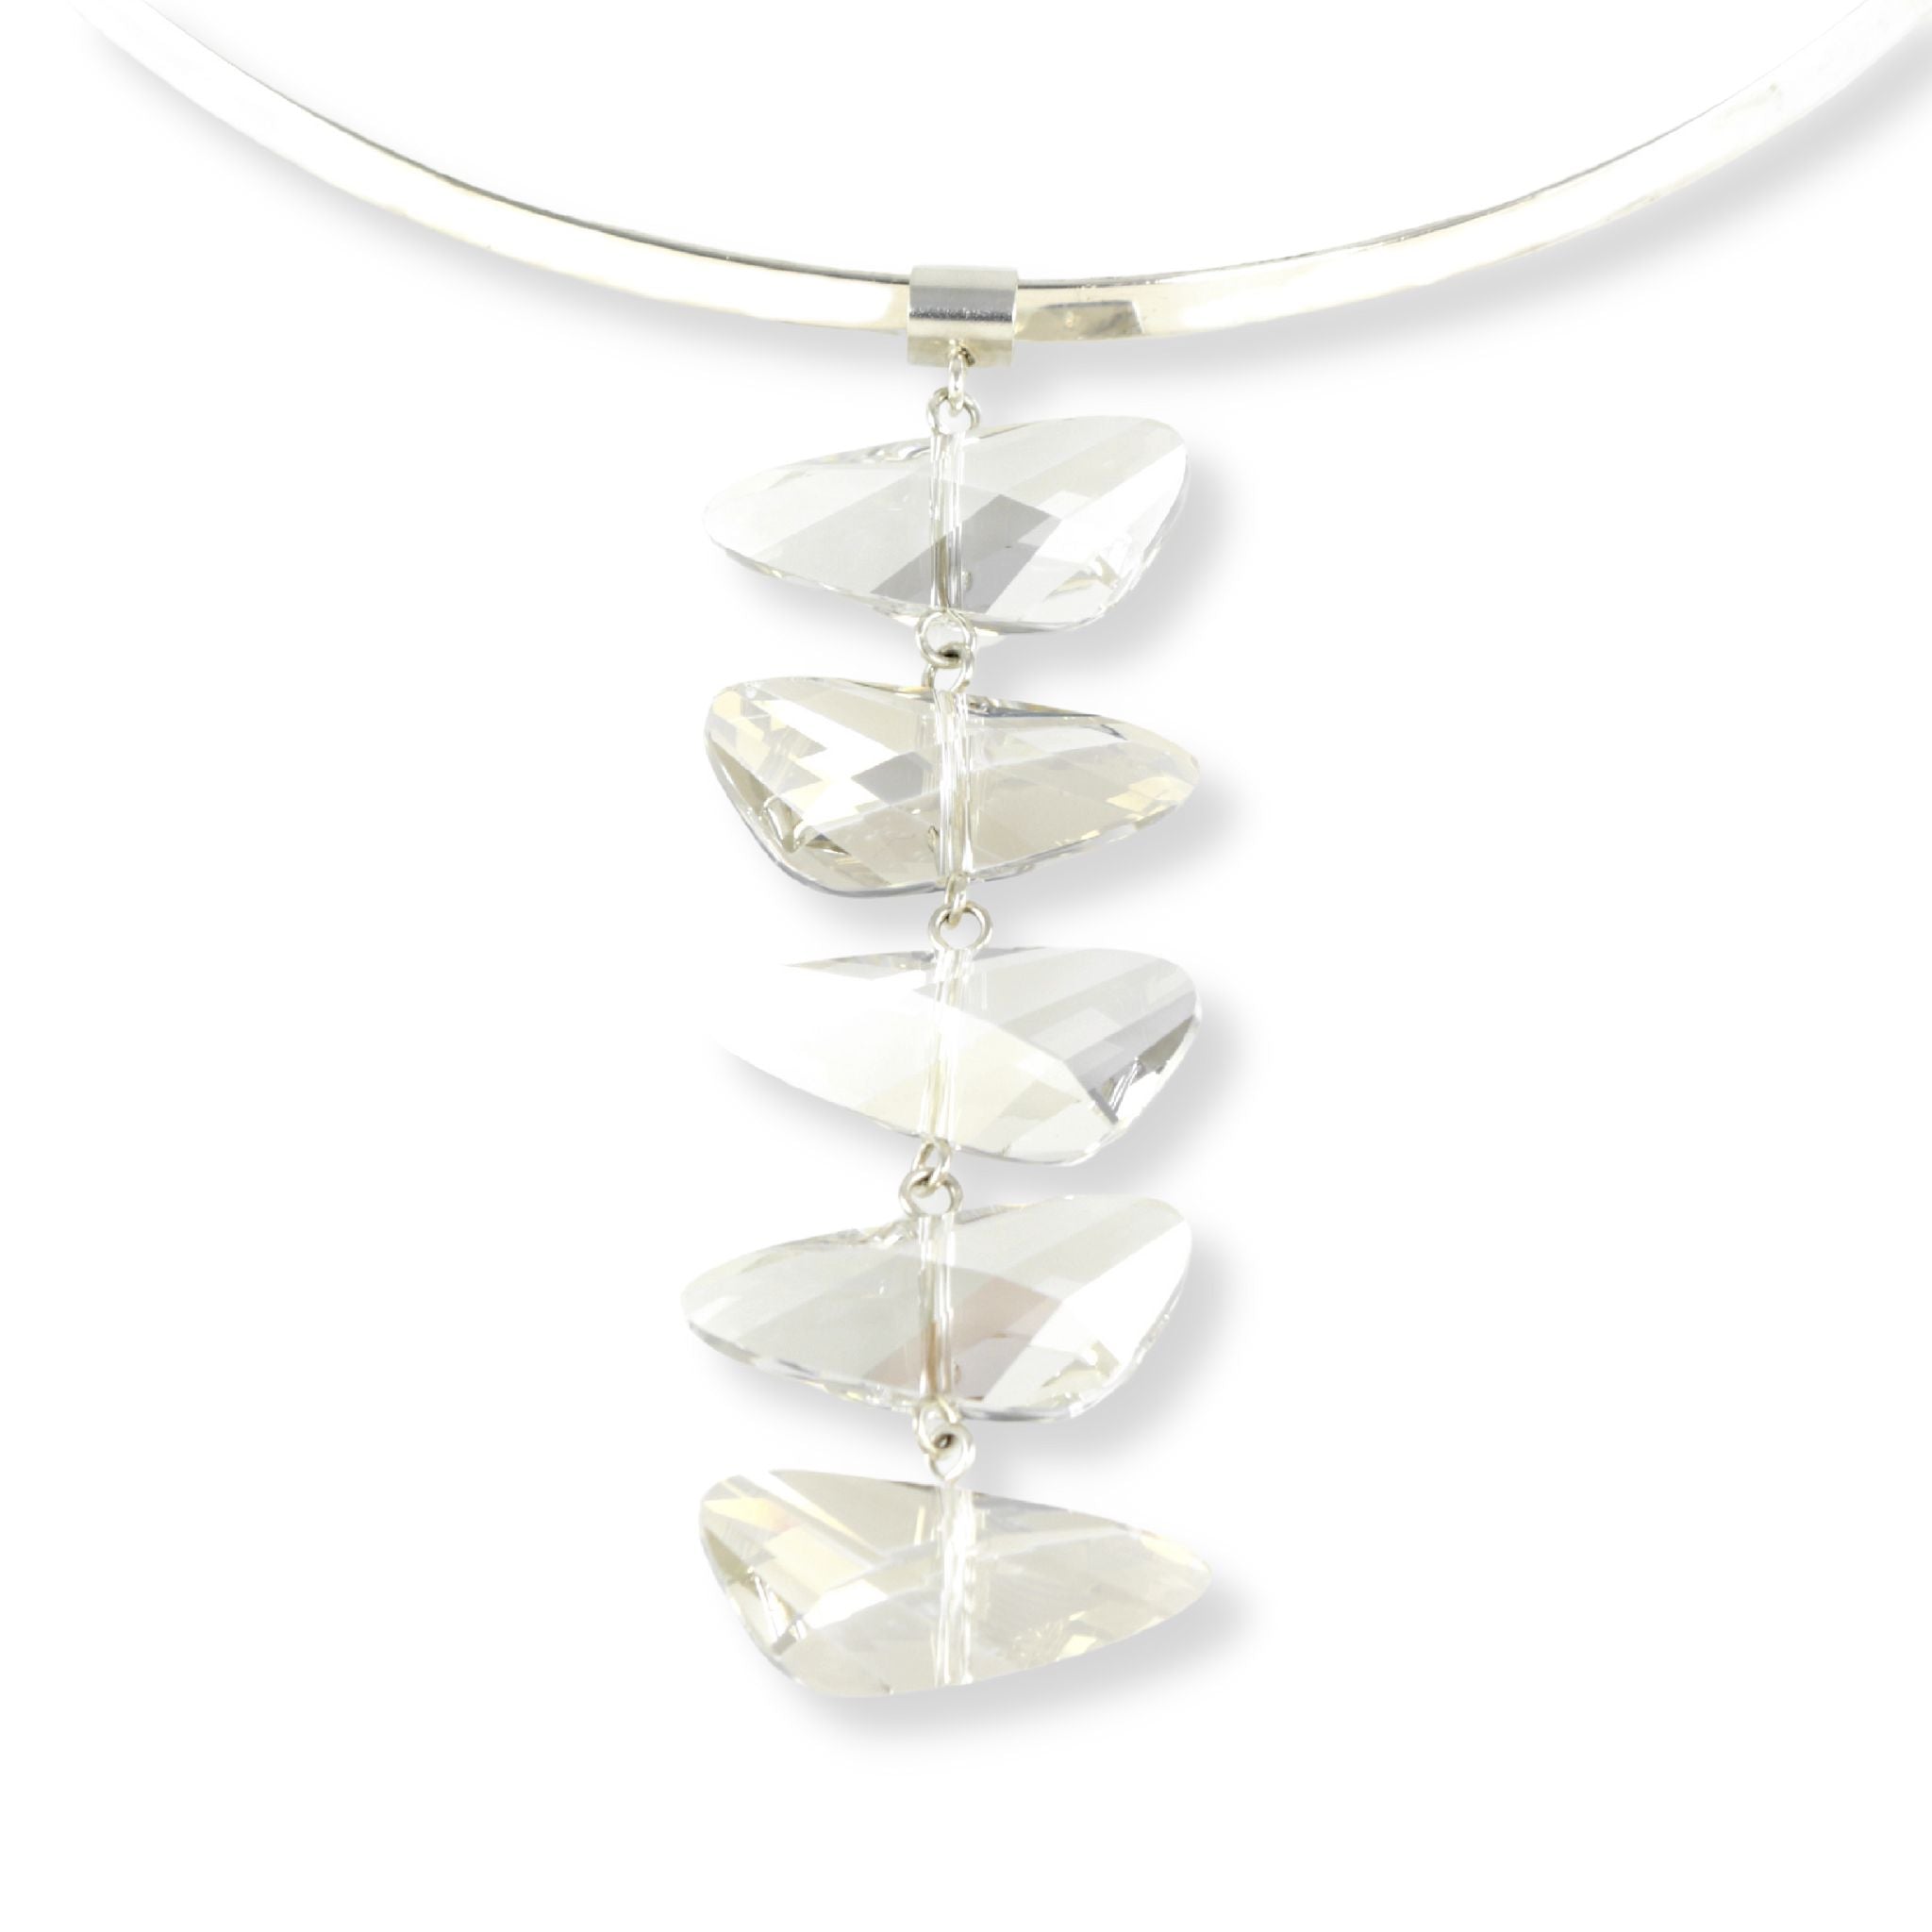 Swarovski crystal pendant necklace with five reflective light silver colored wing shaped crystals on a single removeable strand. Displayed on a silver plated brass torque neck wire.